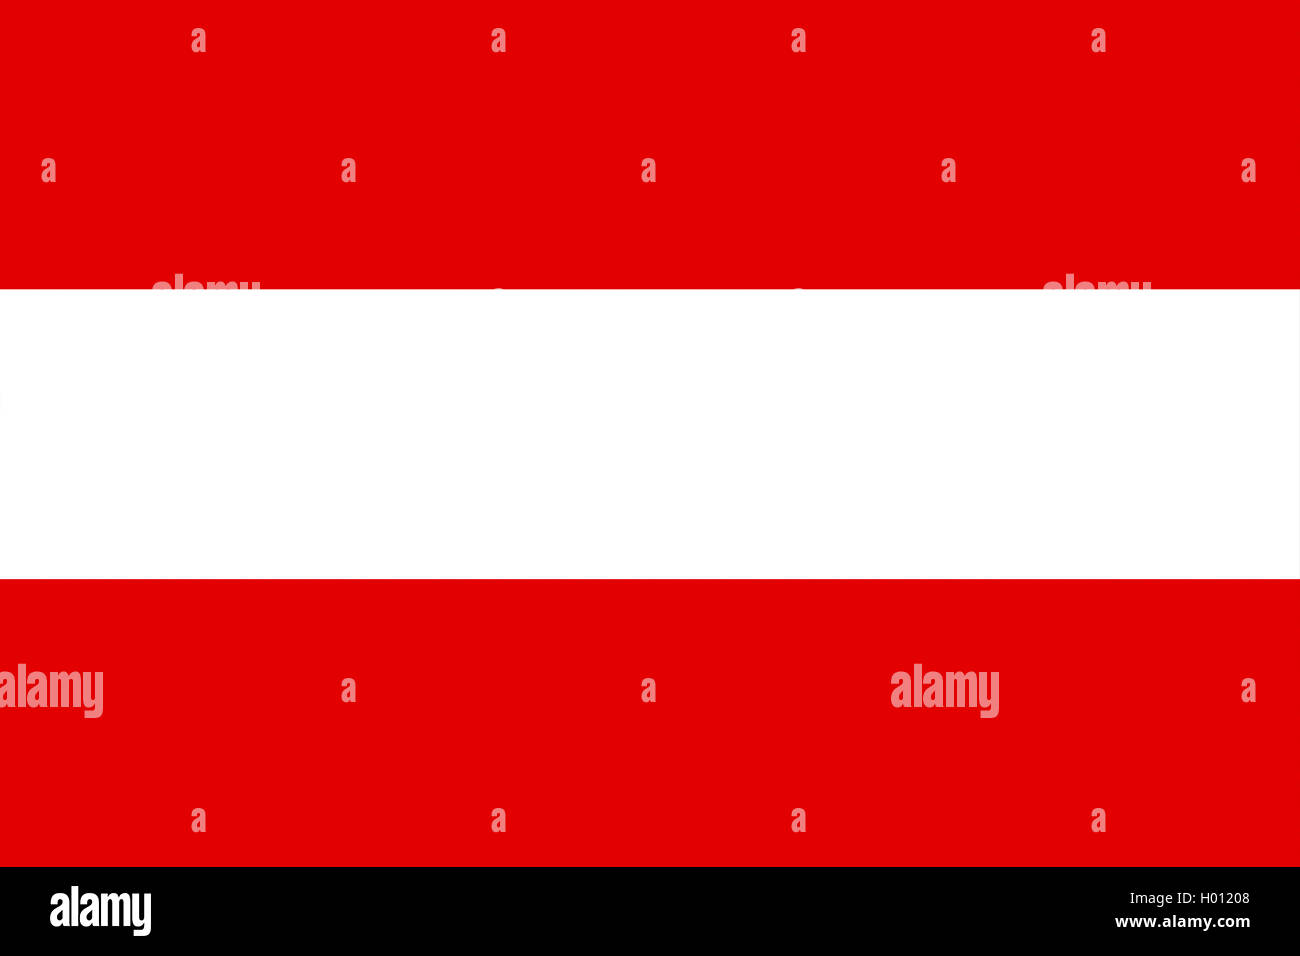 Nationalflagge Republik Österreich, Horizontales Triband In Rot